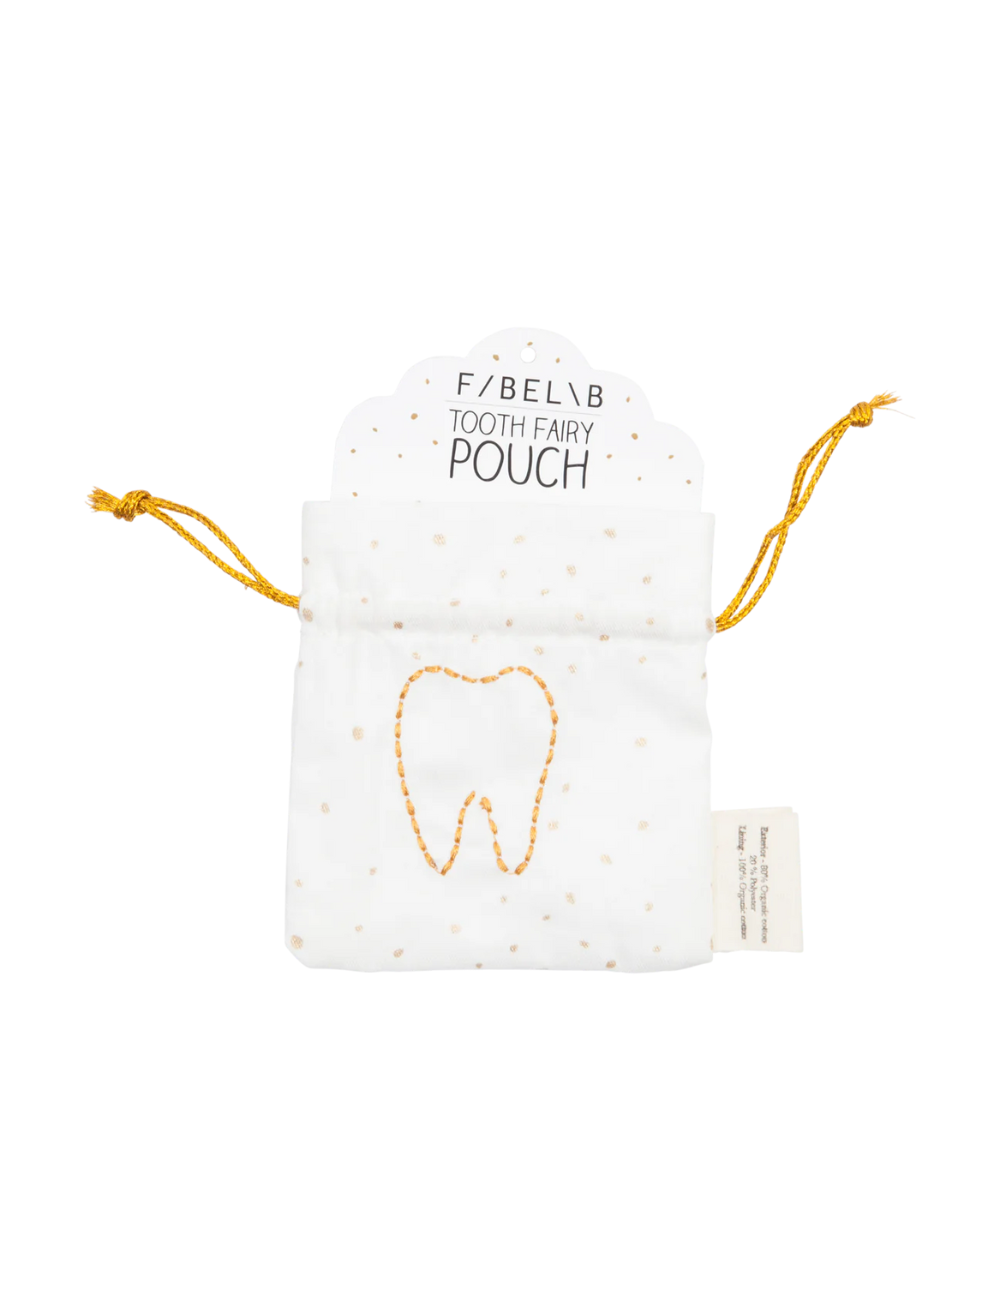 Fabelab Tooth Fairy Pouch